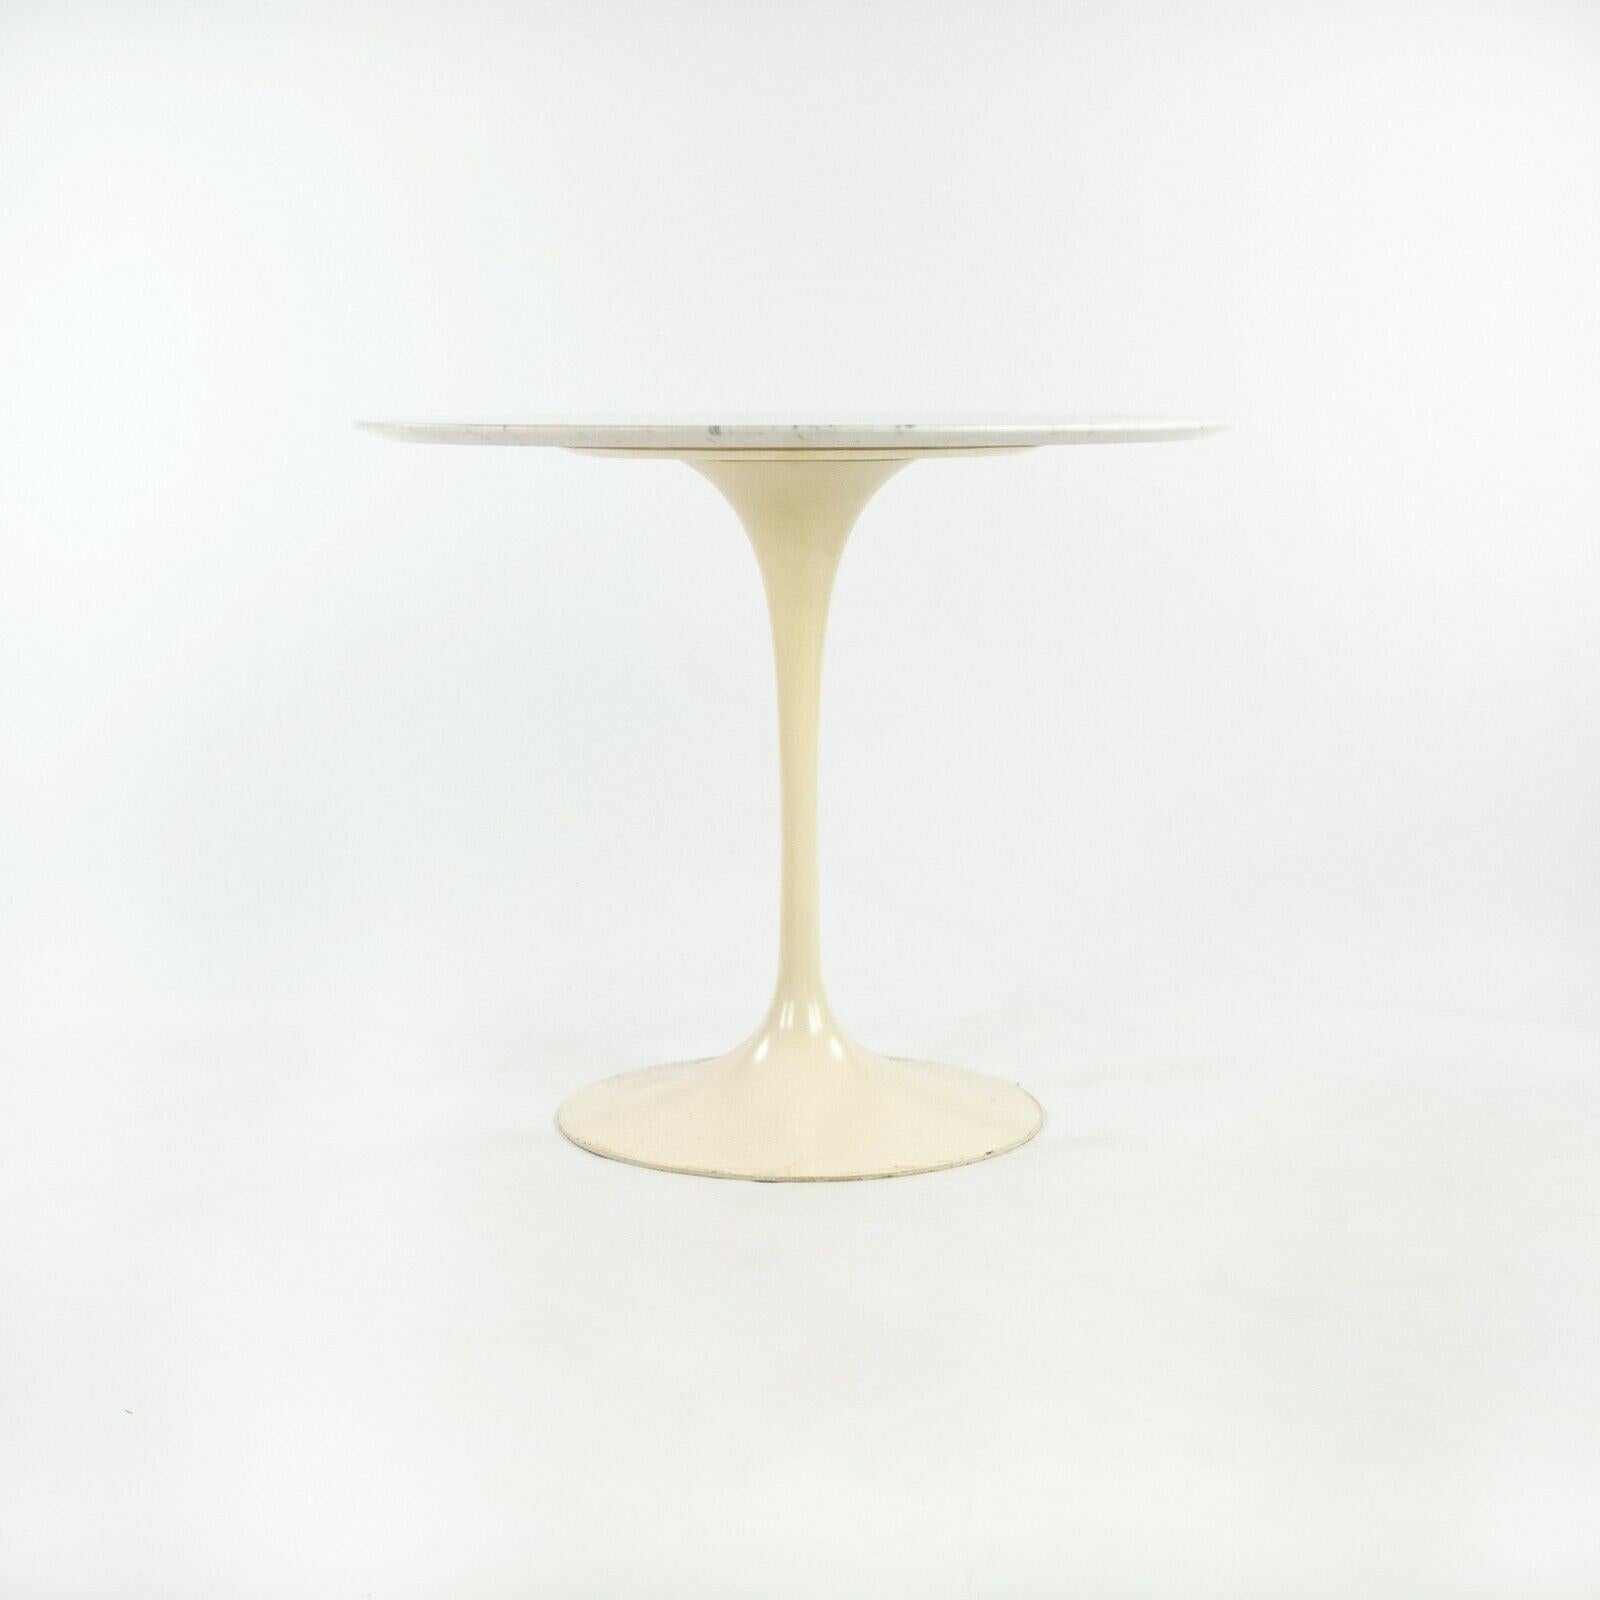 Metal 1958 Eero Saarinen for Knoll Associates Early 36 in Marble Tulip Dining Table For Sale